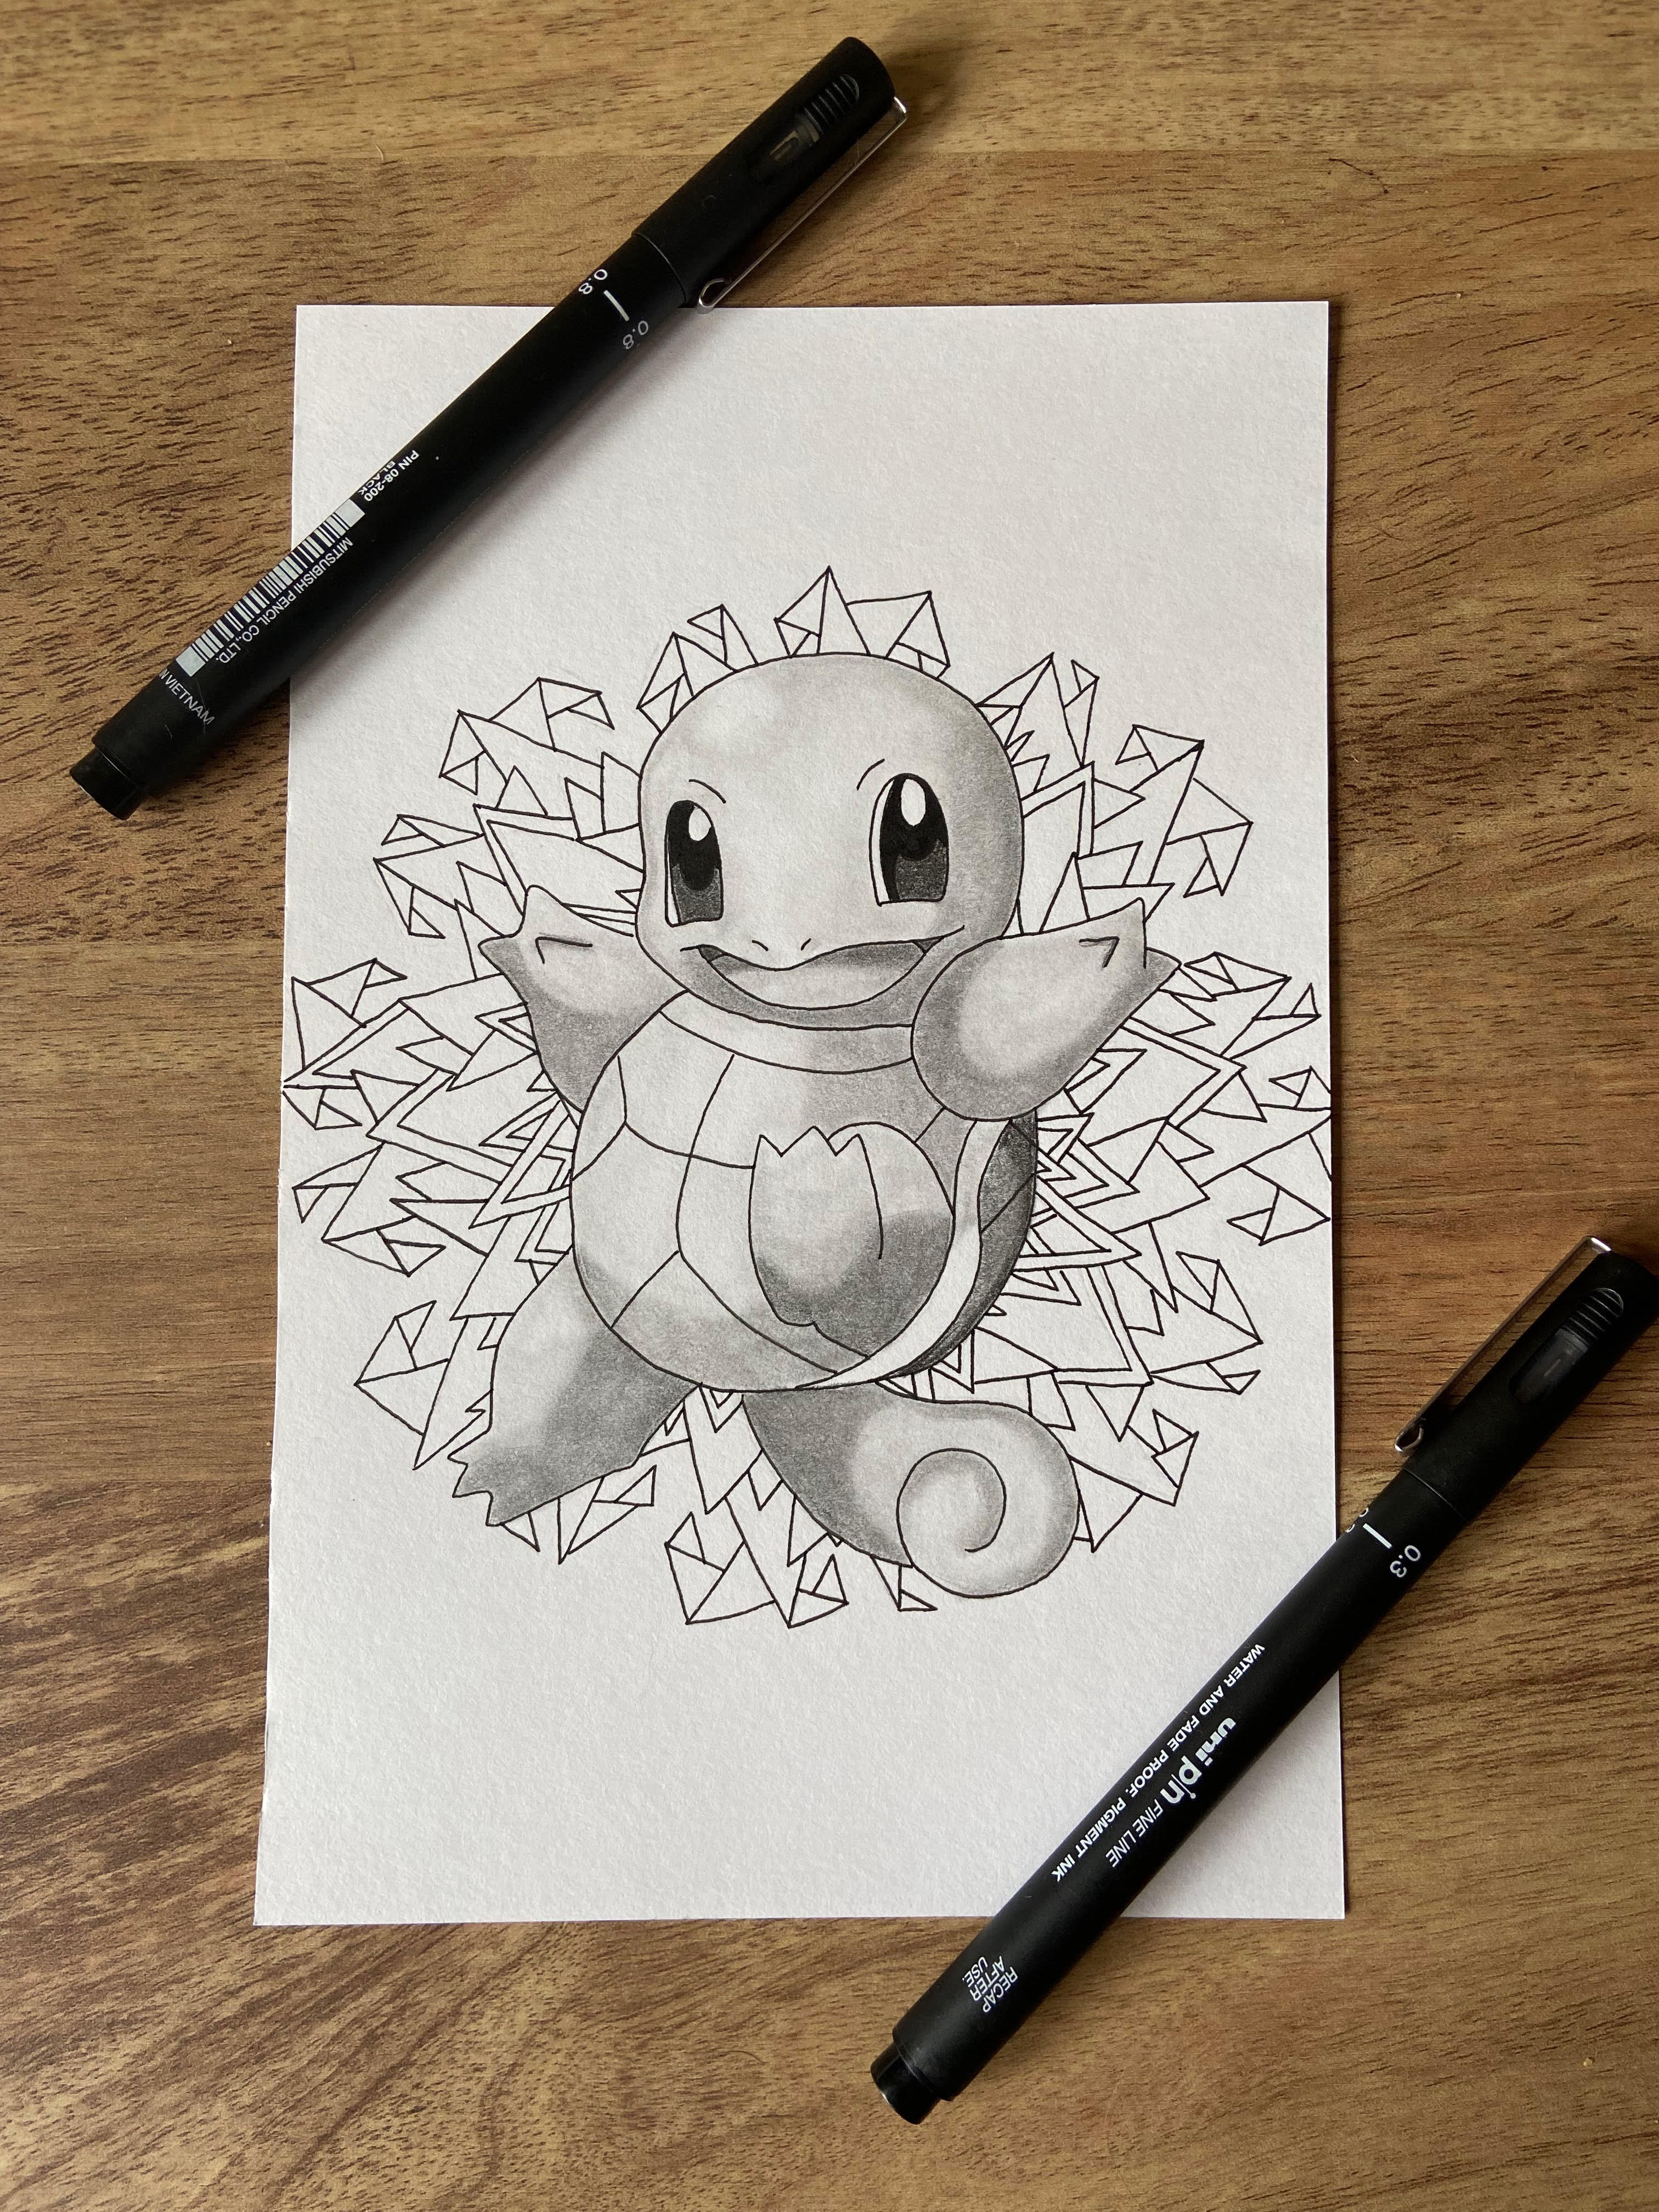 Pencil drawing of the Pokemon Squirtle